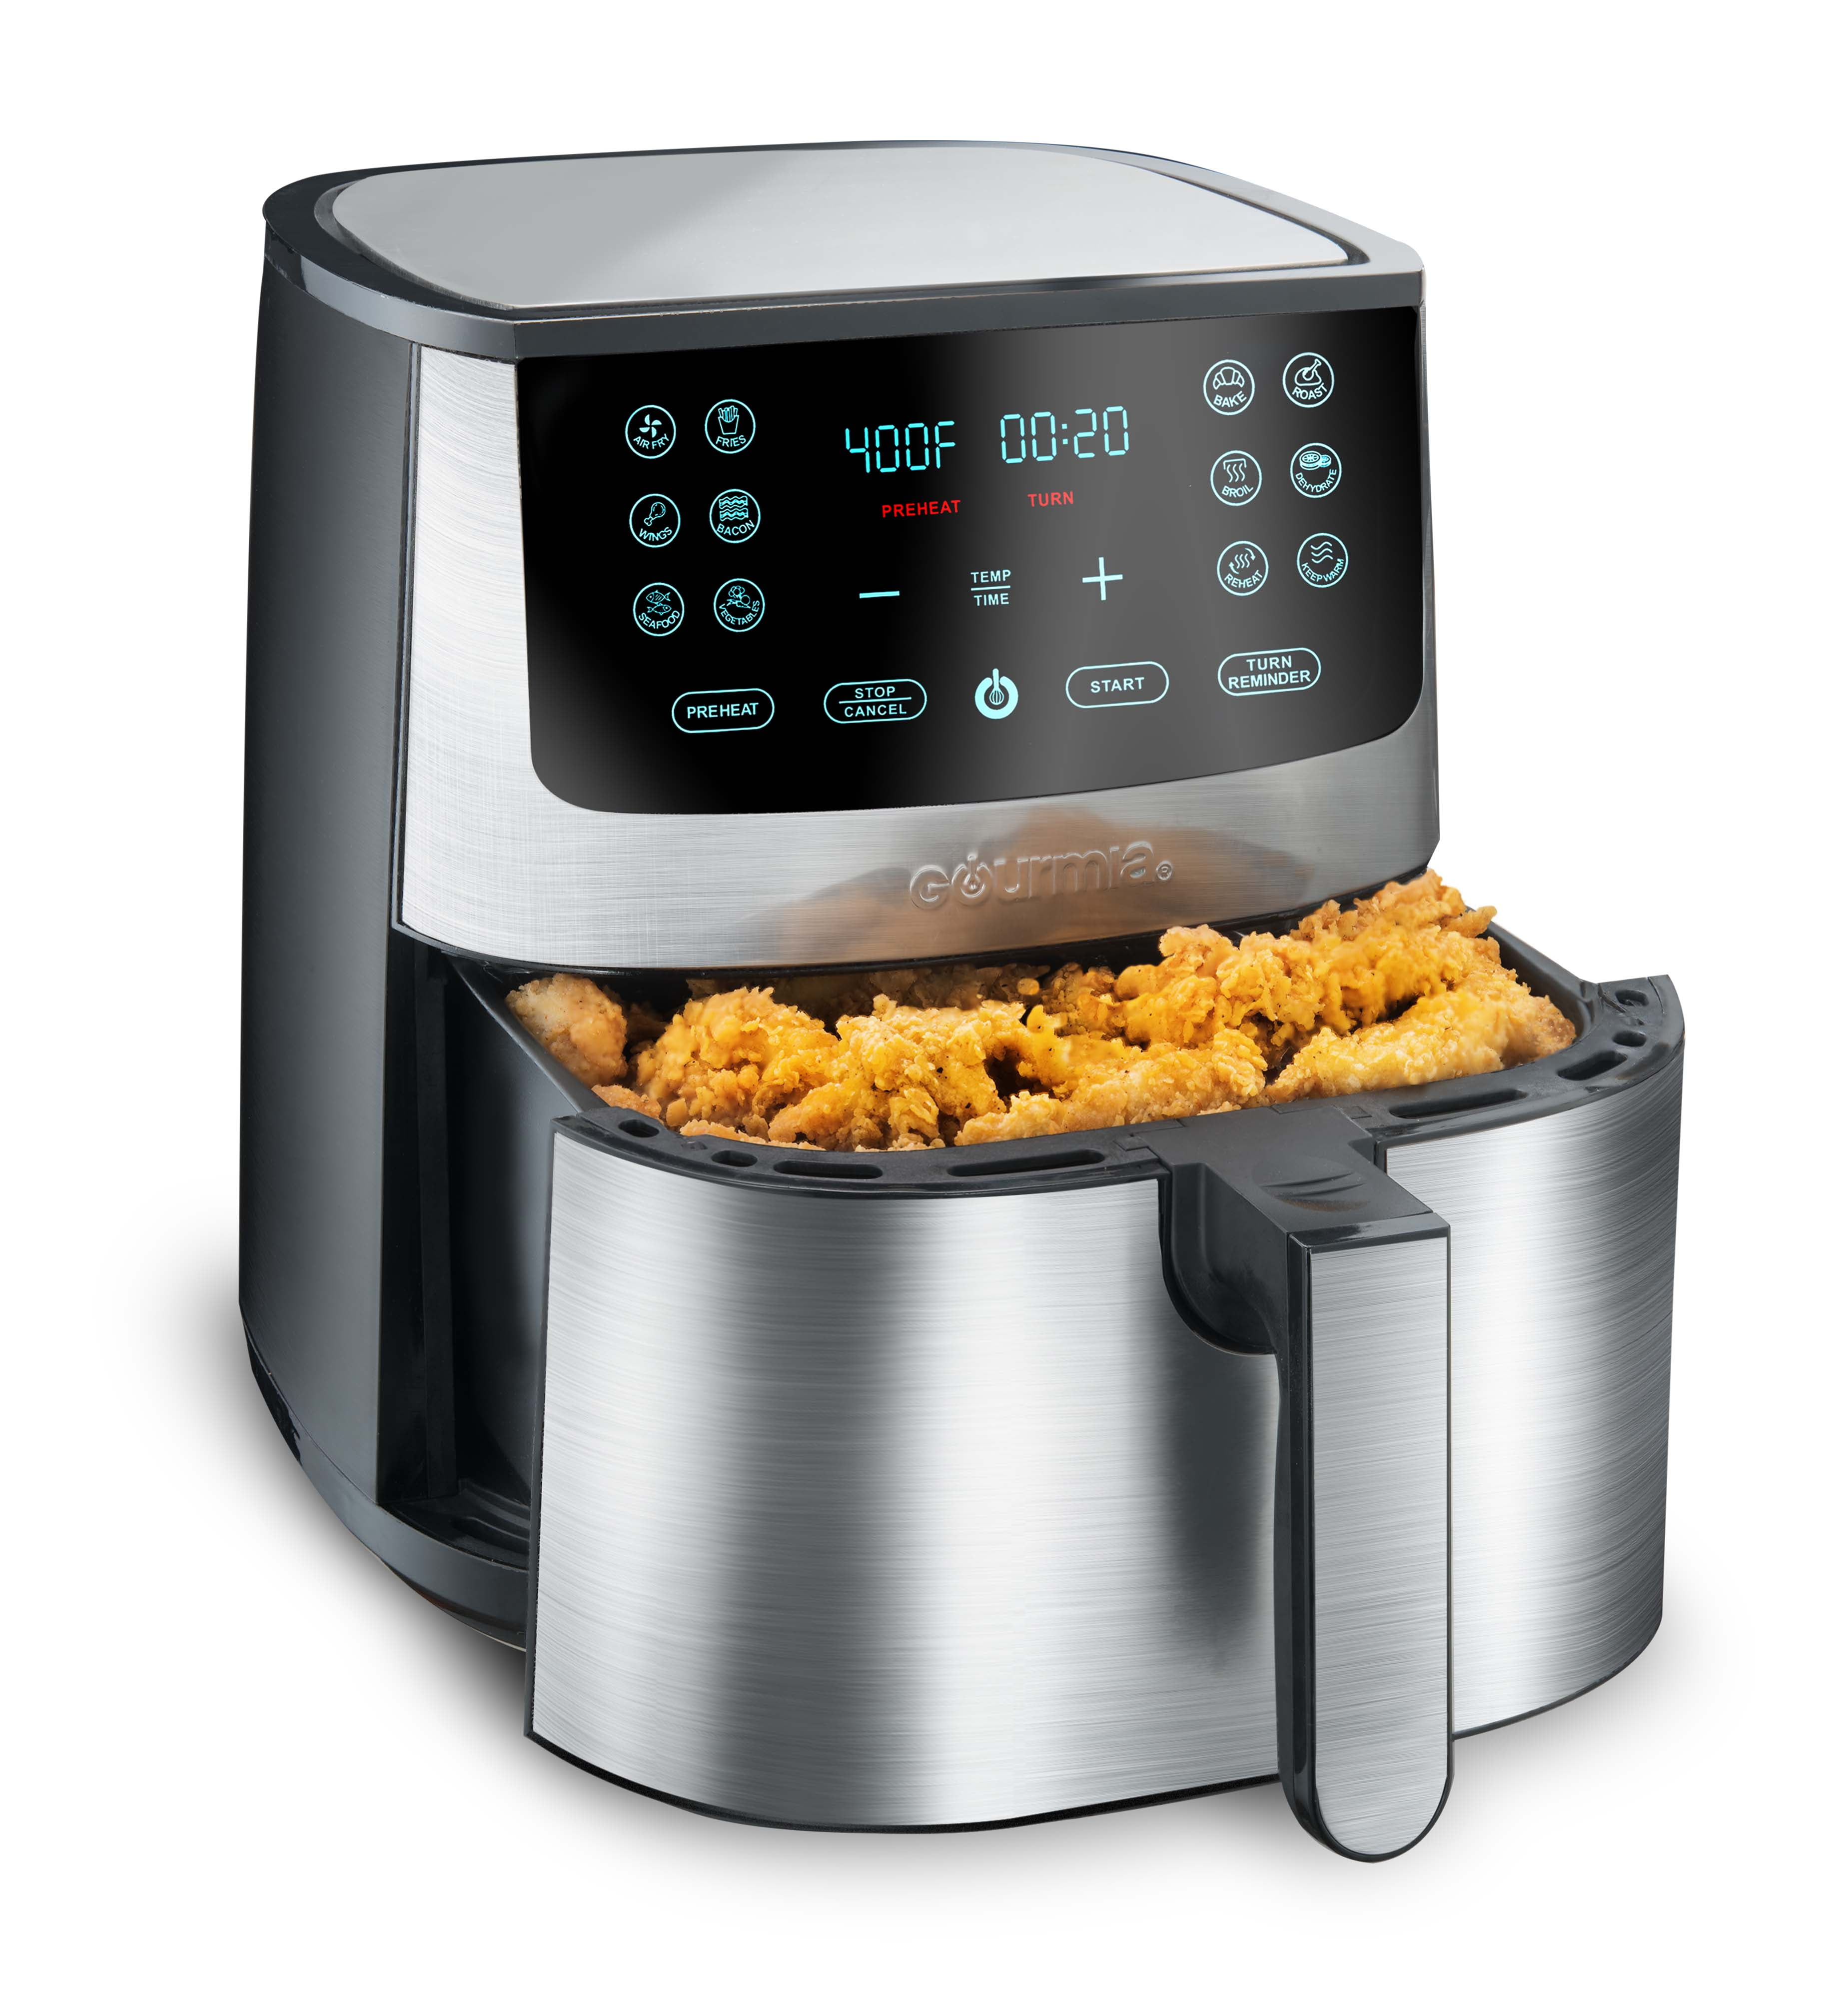 Gourmia Air Fryer Oven: A New, Healthier Style of Cooking – HHS Press